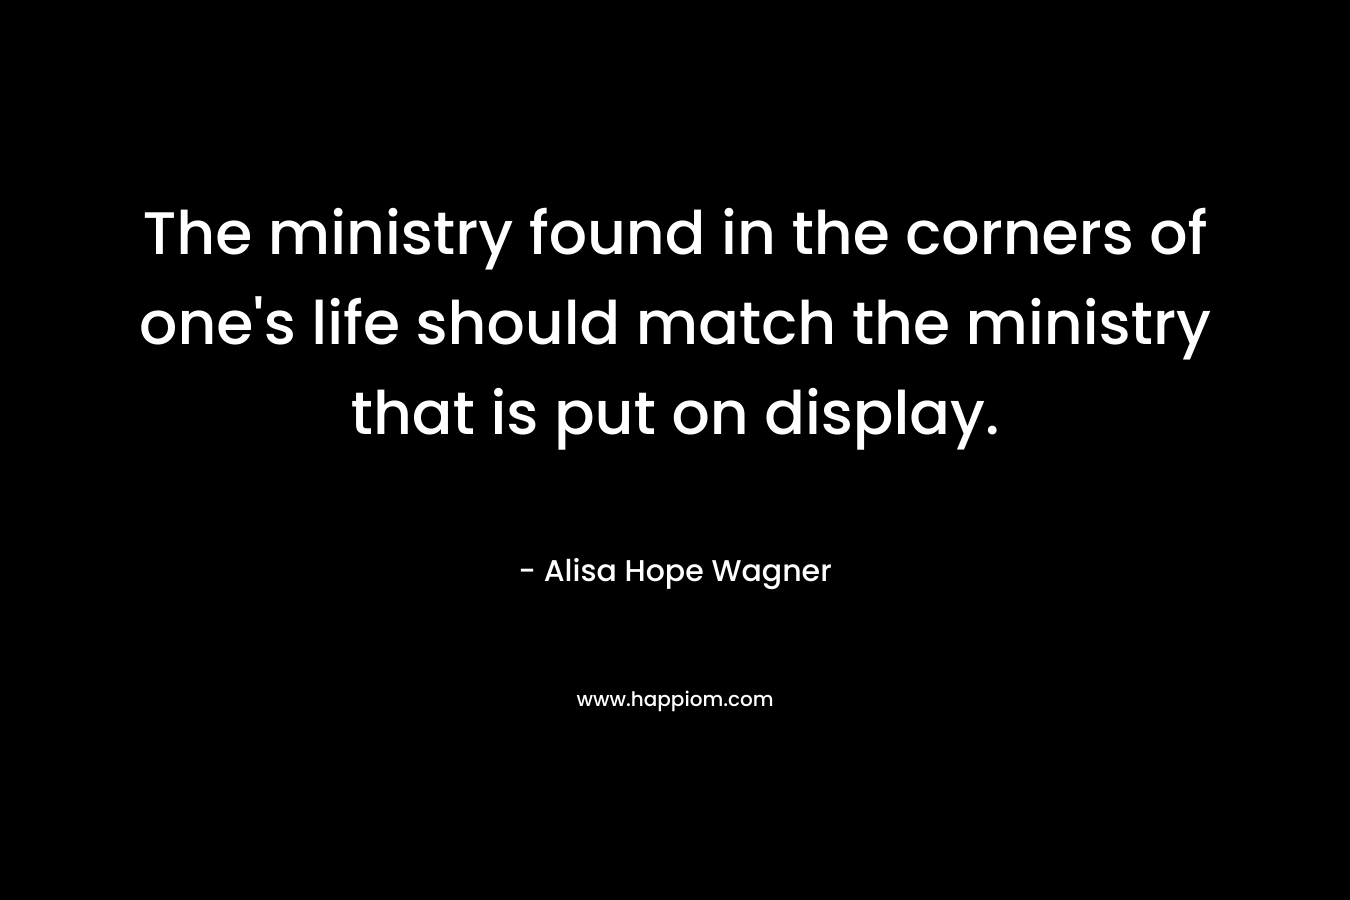 The ministry found in the corners of one’s life should match the ministry that is put on display. – Alisa Hope Wagner